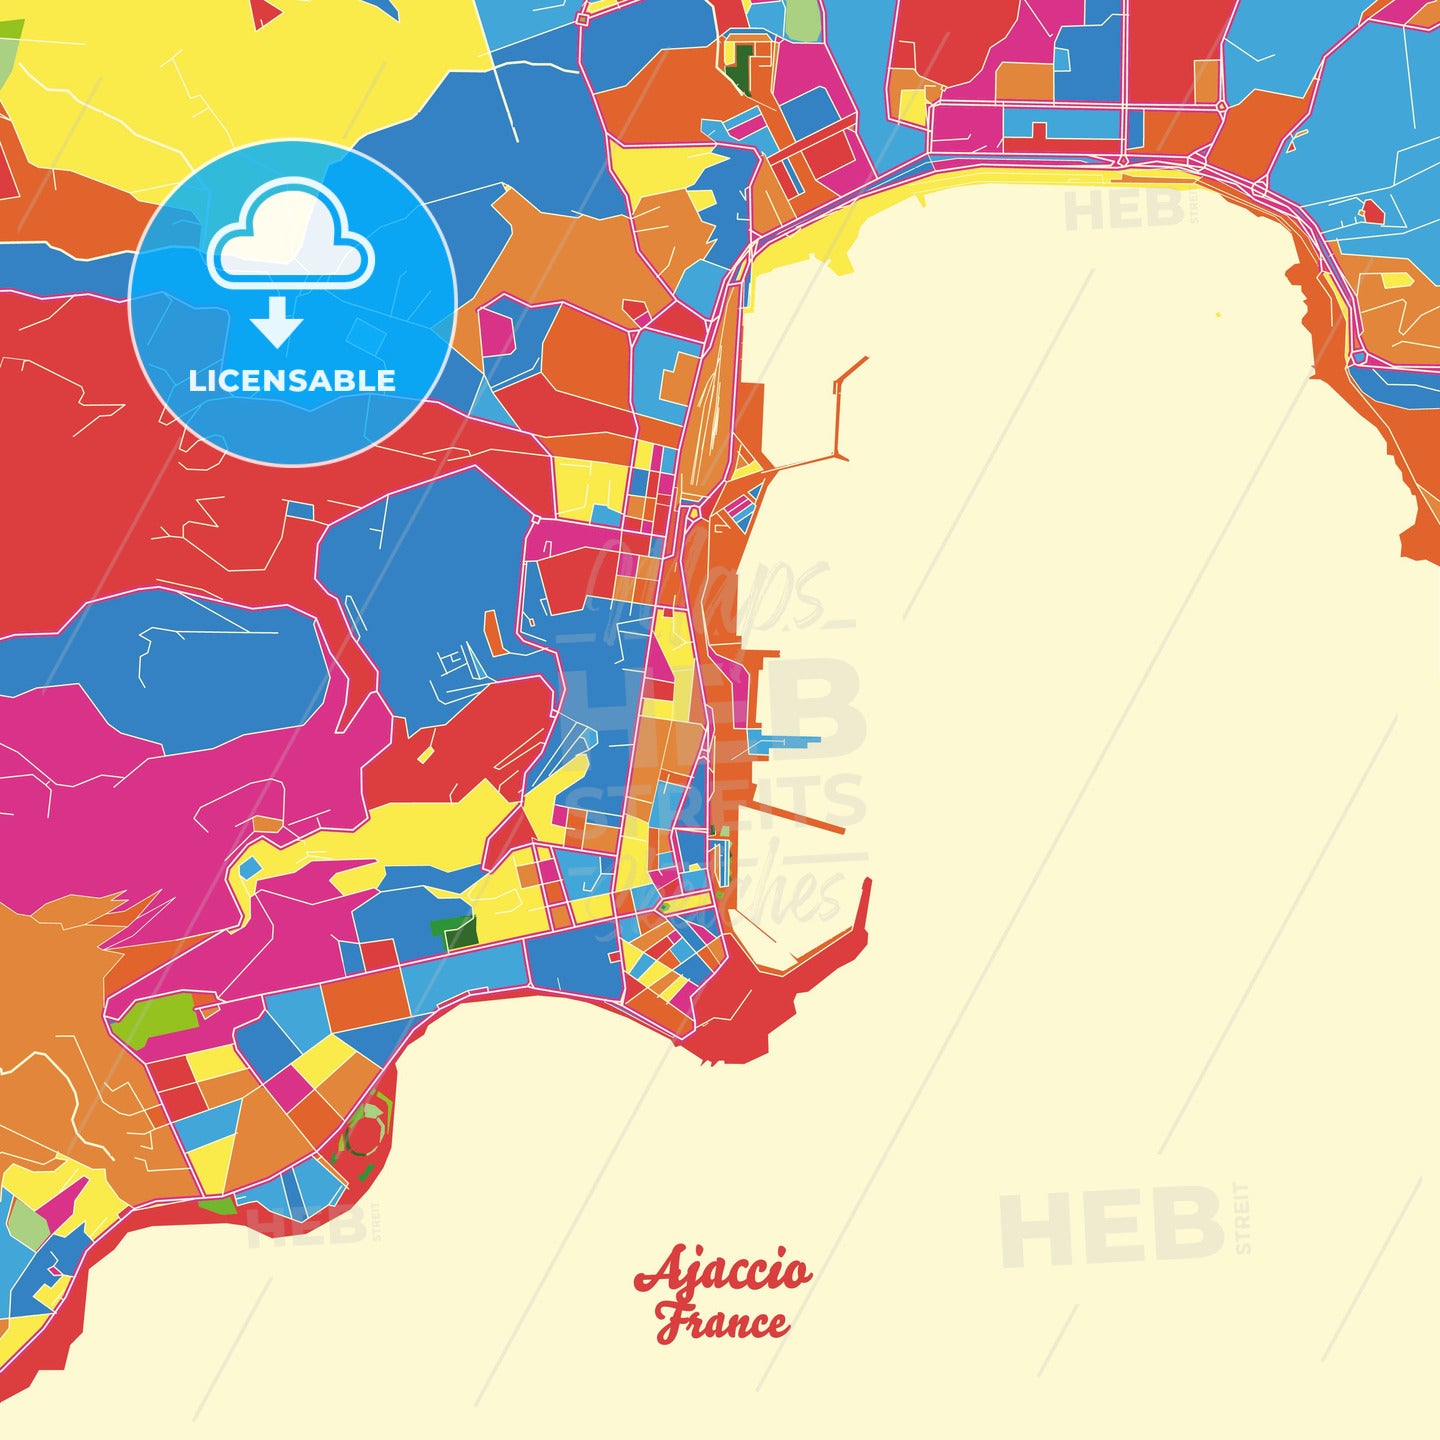 Ajaccio, France Crazy Colorful Street Map Poster Template - HEBSTREITS Sketches